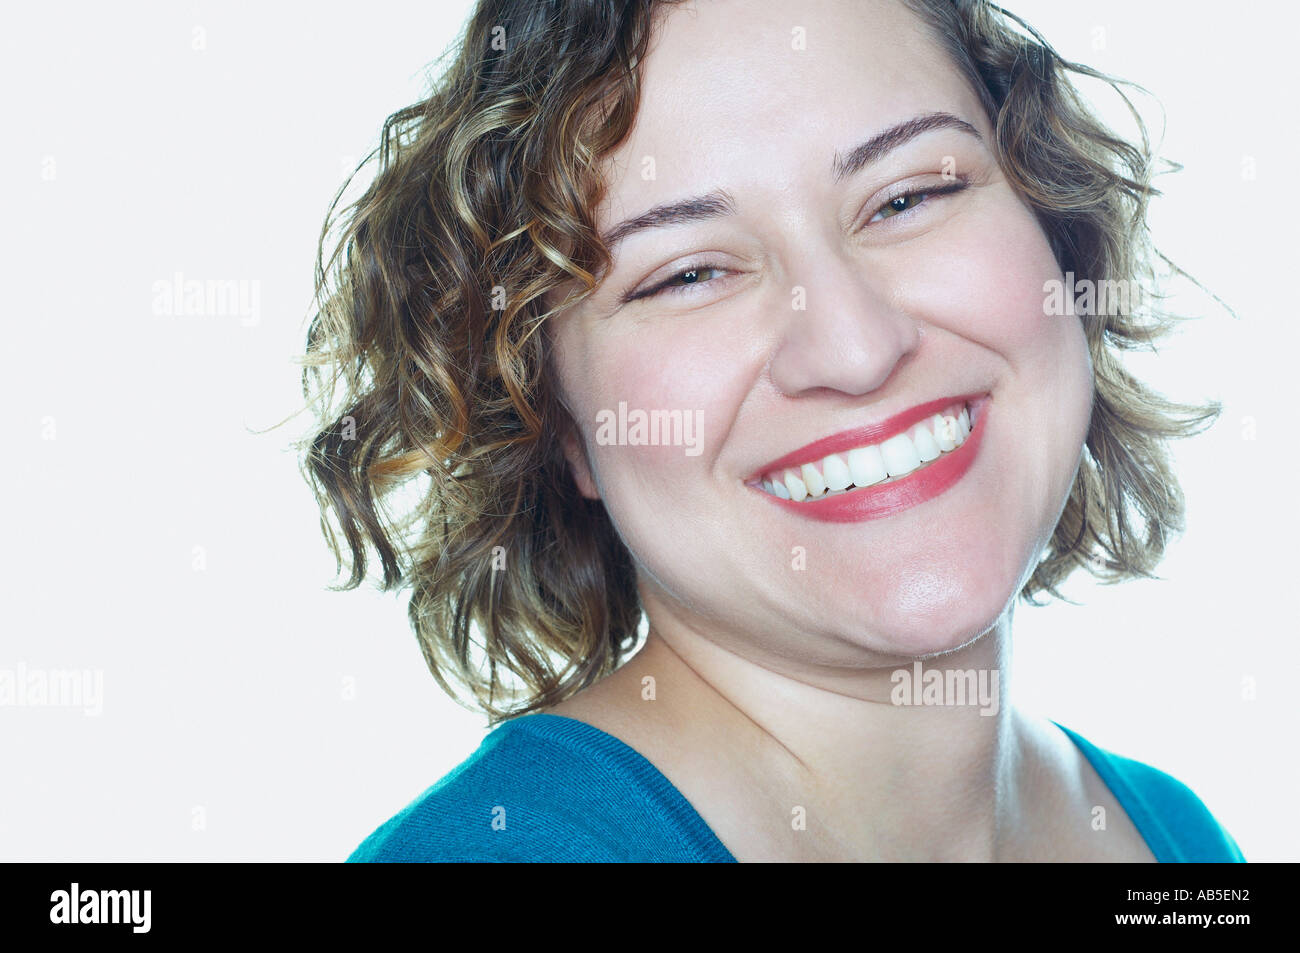 Young woman smiling for the camera Stock Photo